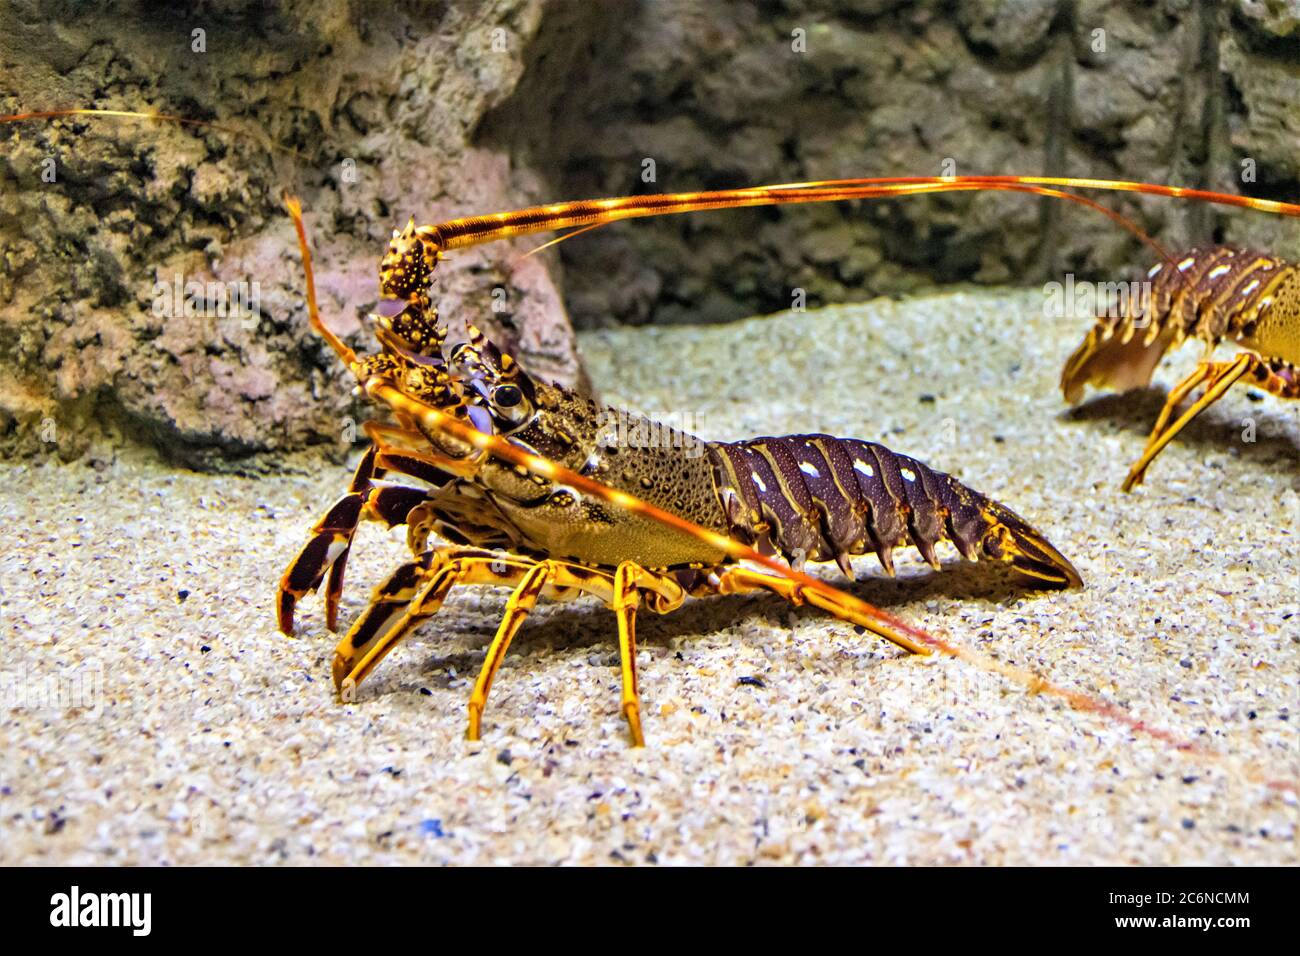 Lobster walking on the sand underwater, close up Stock Photo